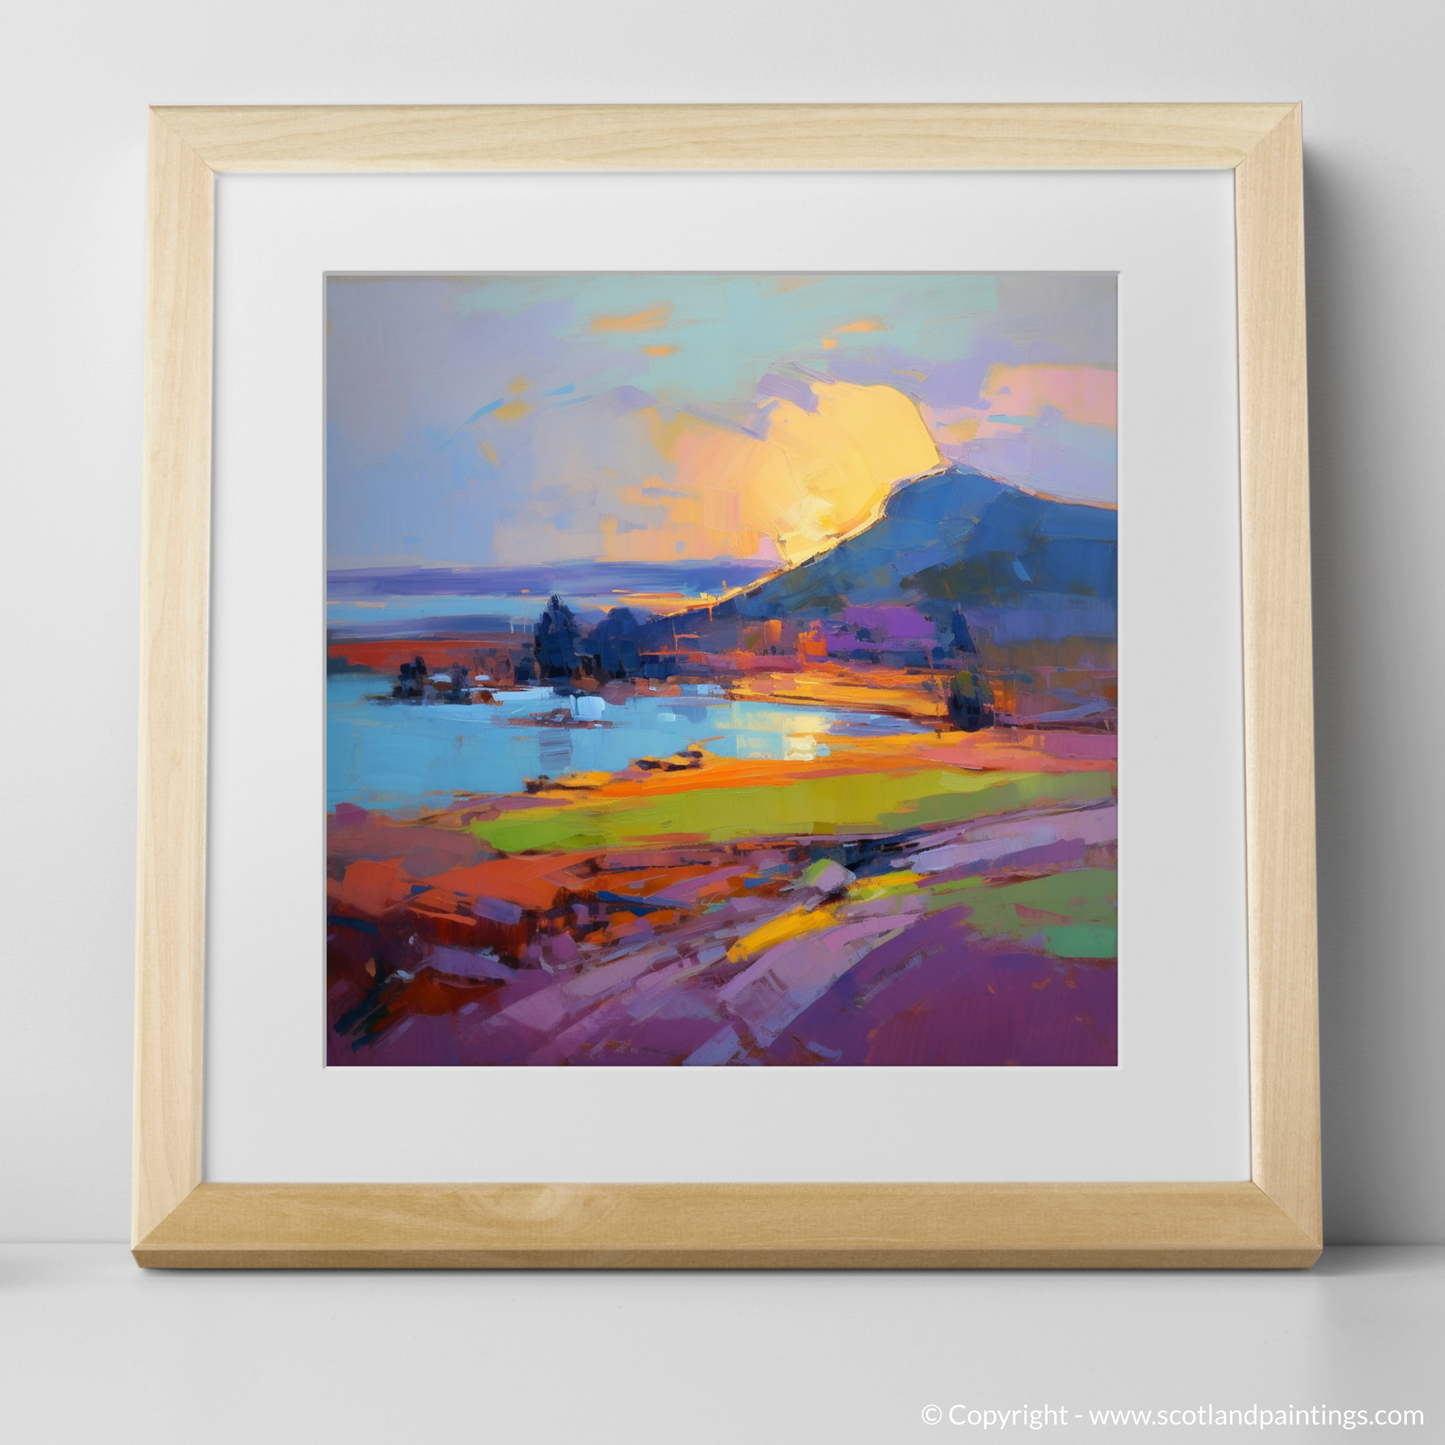 Coldingham Bay at Sunset: An Expressionist Ode to Scottish Shores